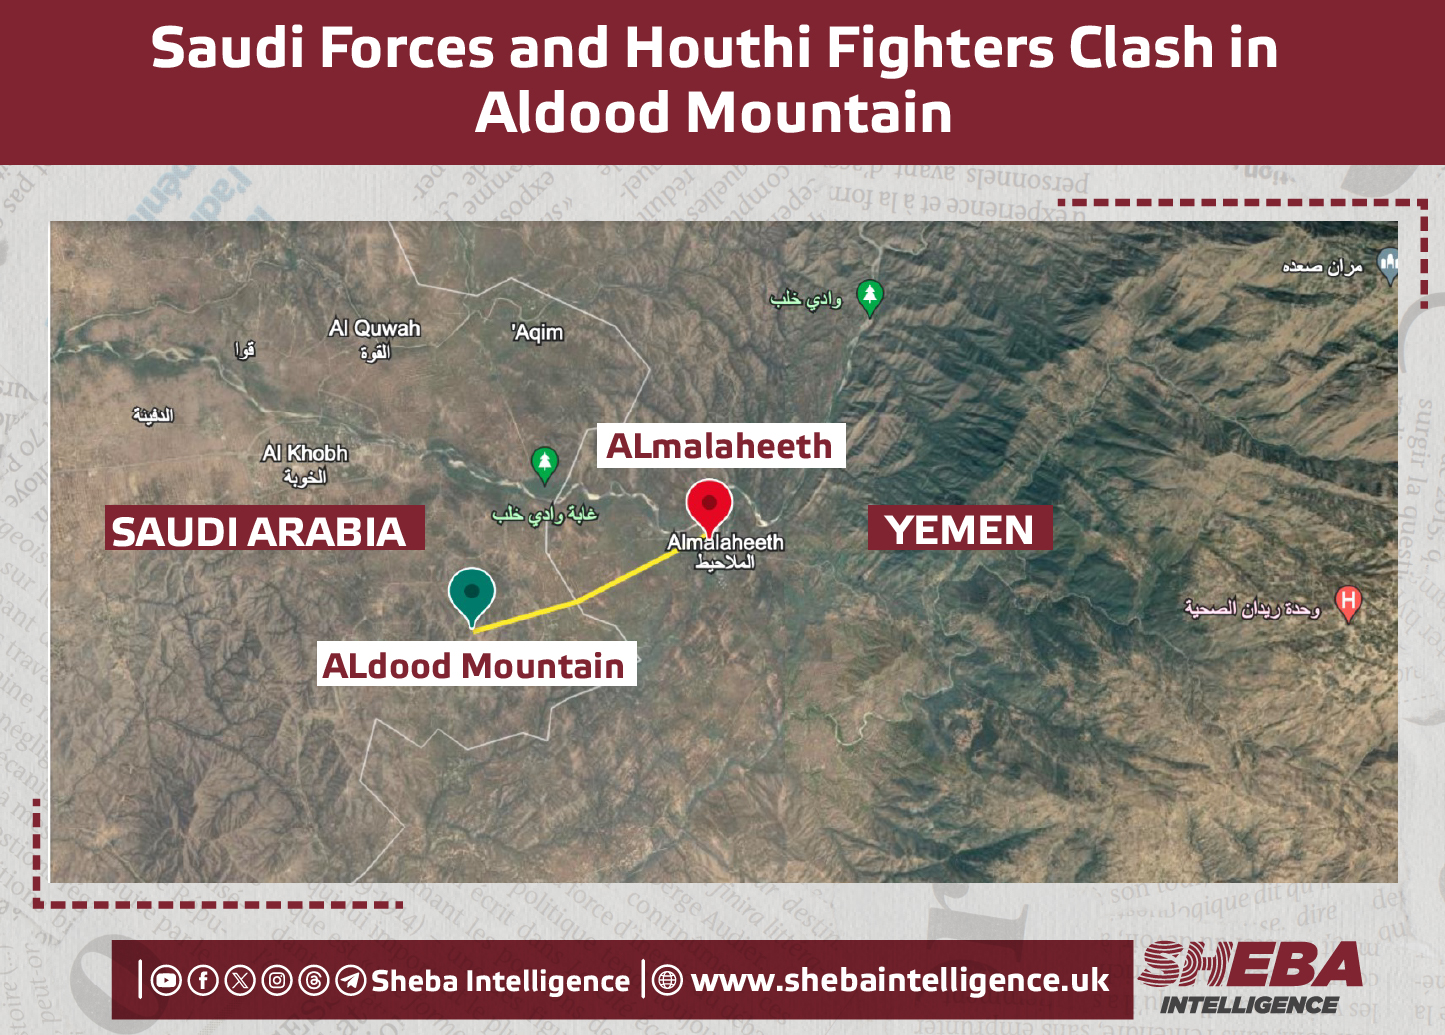 Saudi Forces and Houthi Fighters Clash in Aldood Mountain